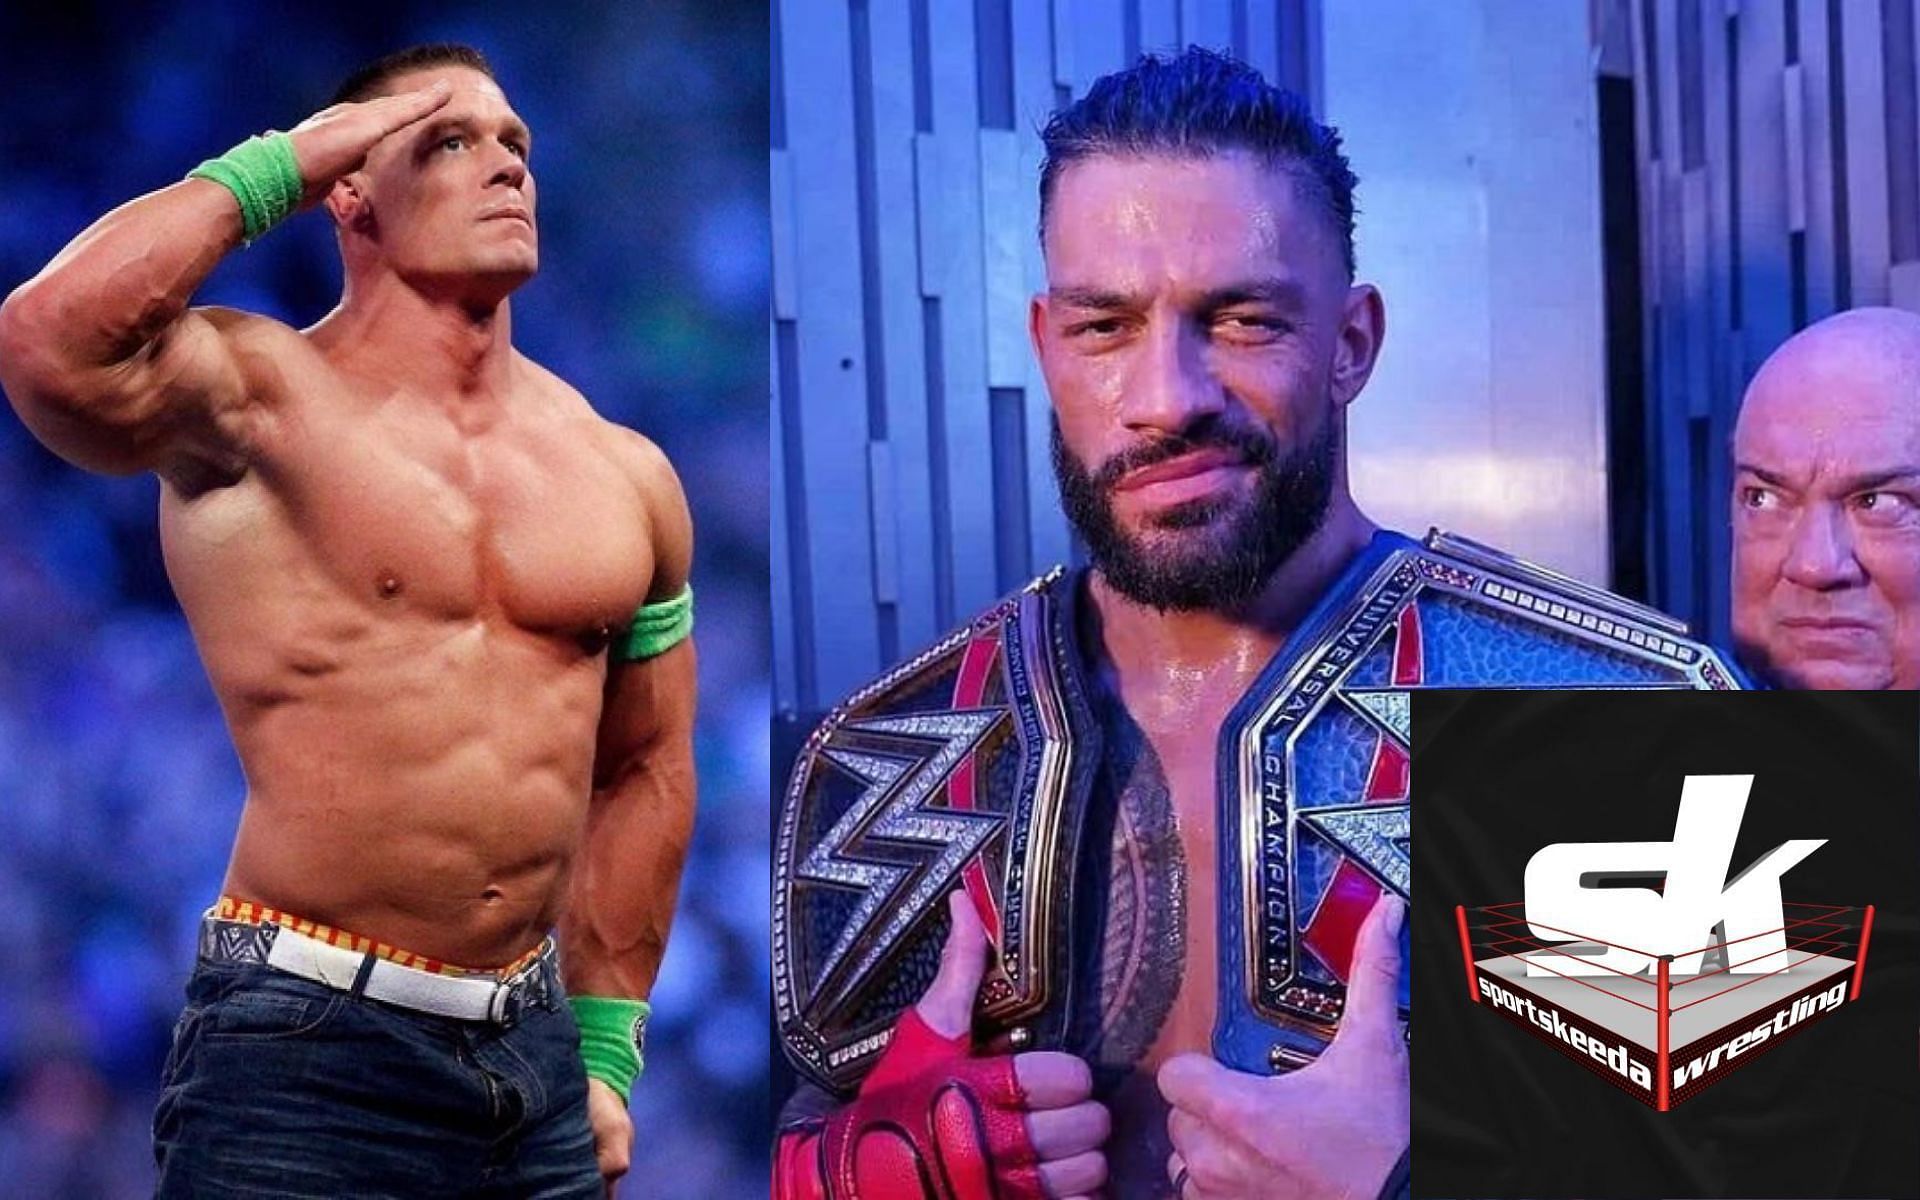 John Cena and Roman Reigns are two of WWE